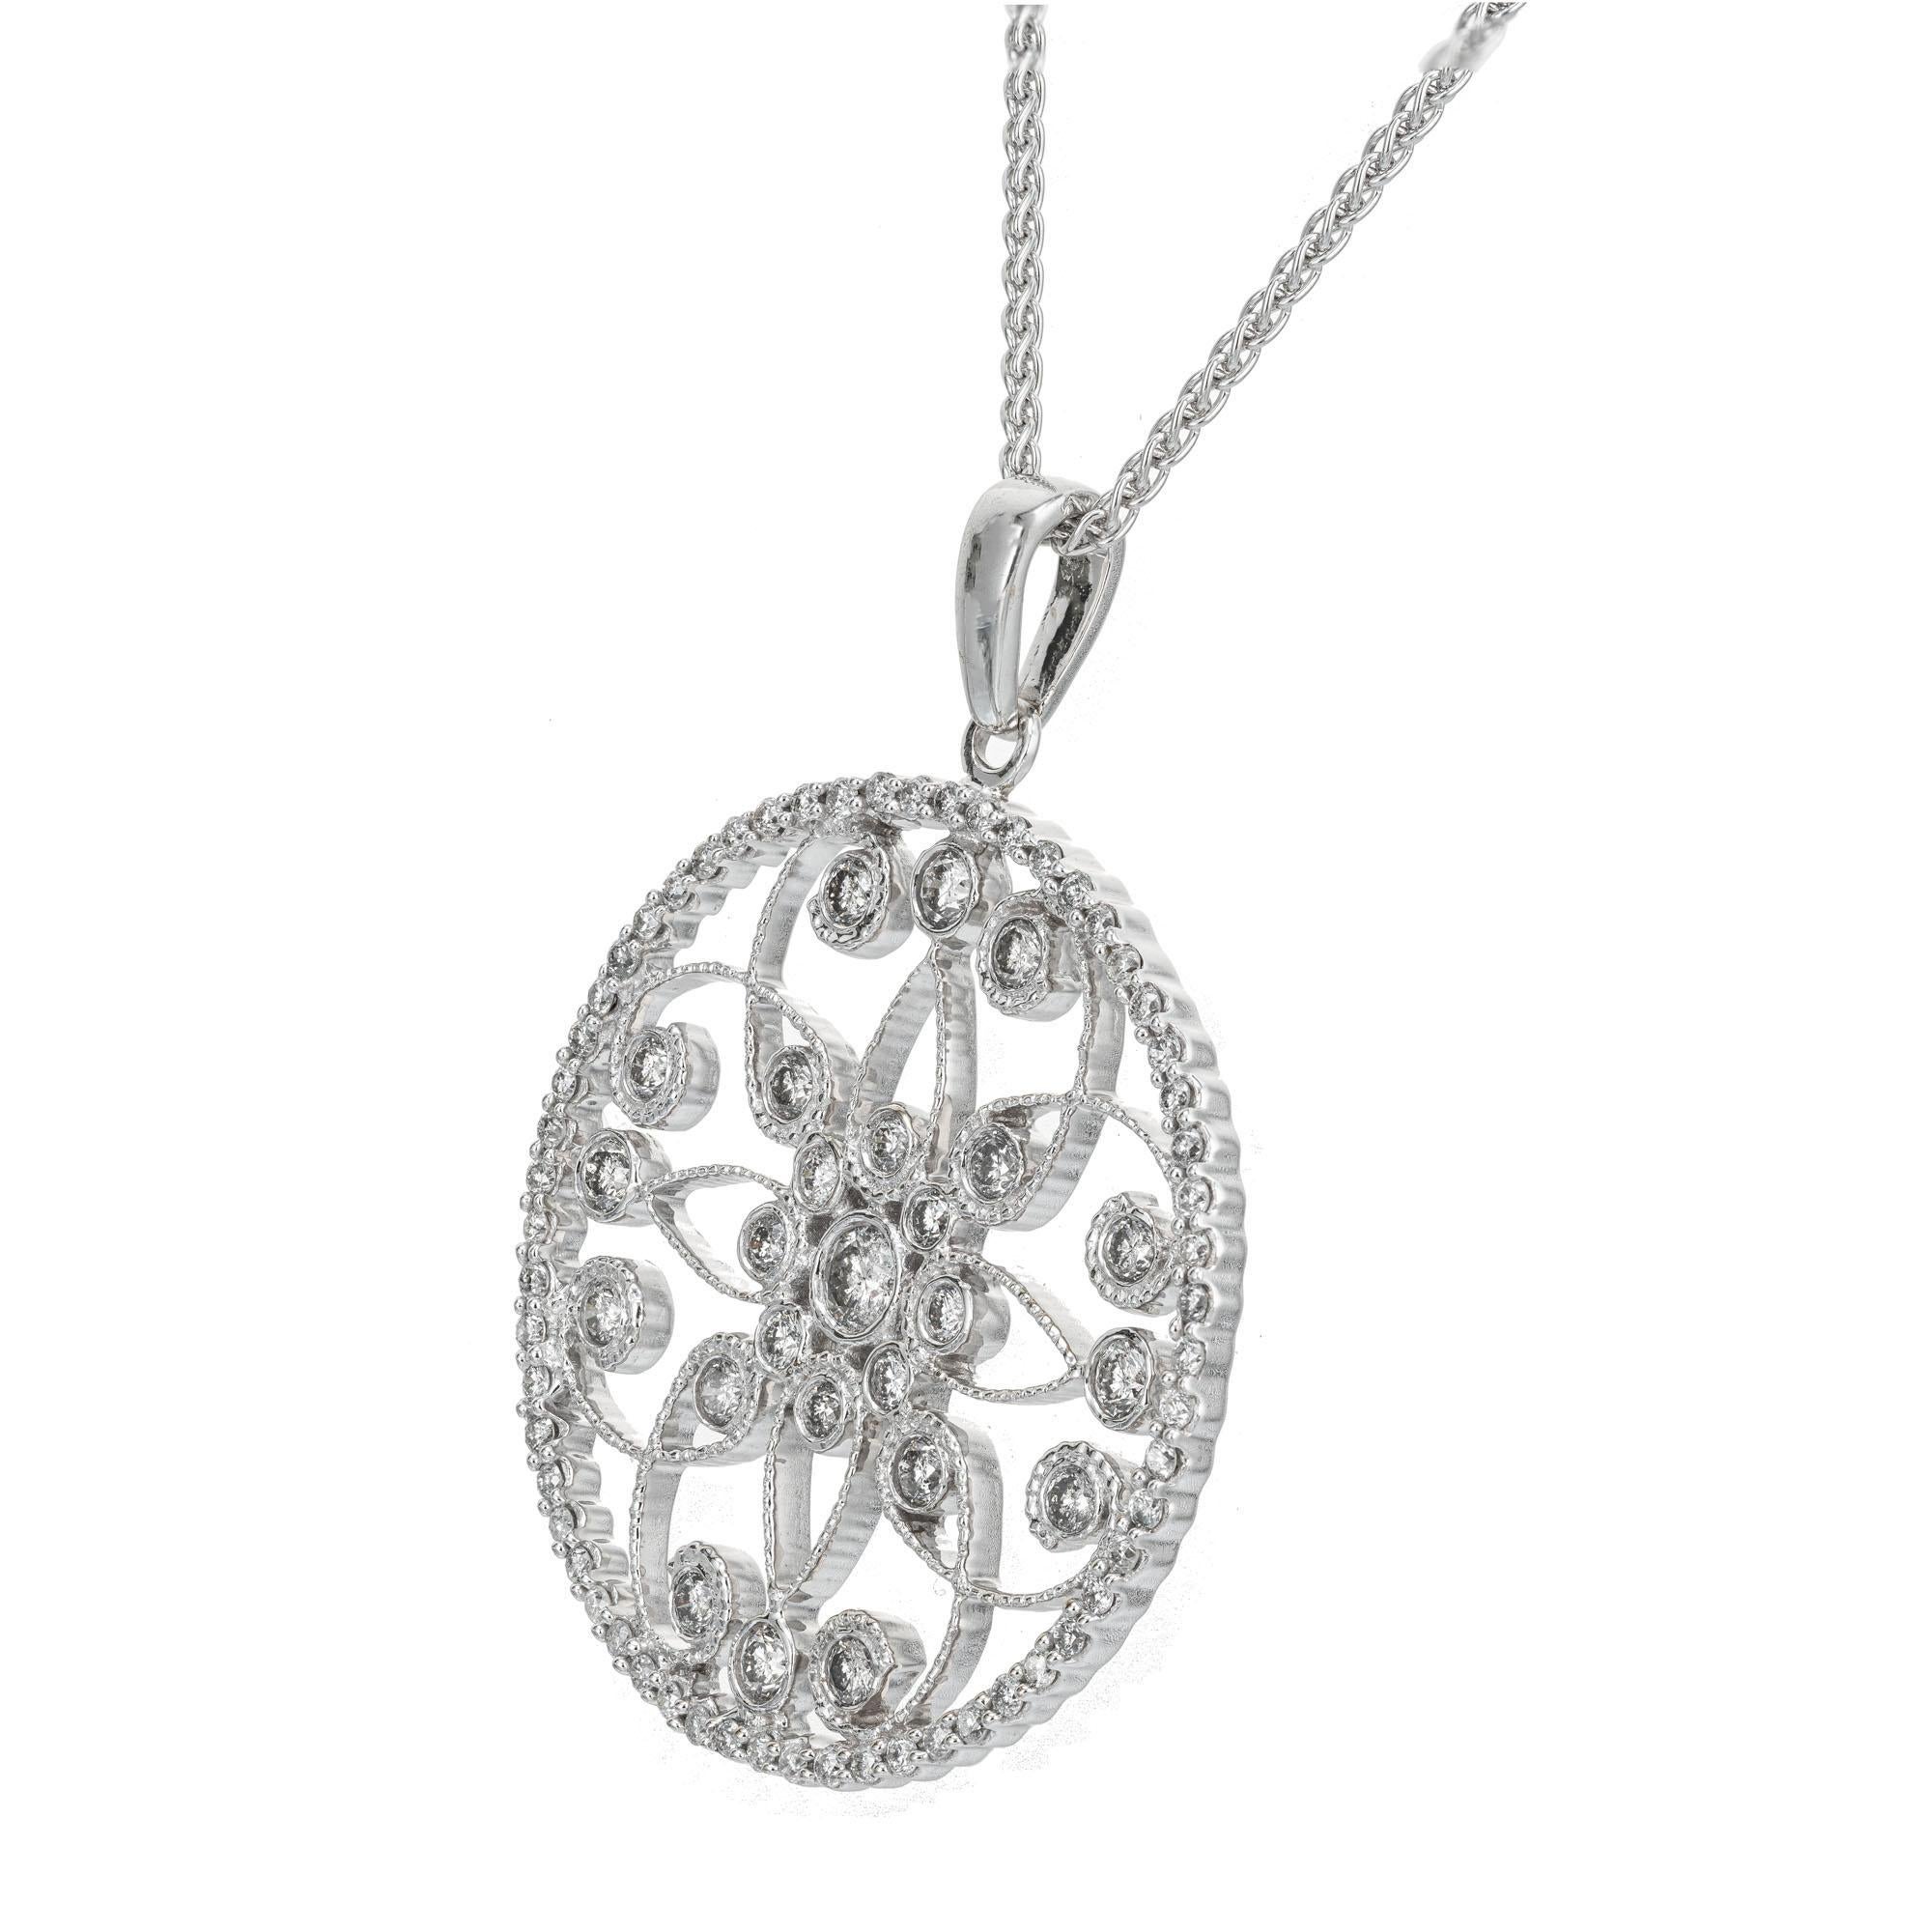 Diamond pendant necklace. Set with 84 round brilliant cut diamonds set in 14k white gold. 16 Inch wheat chain with a lobster catch.

84 round brilliant cut diamonds, H-I SI-I approx. .90cts
14k white gold 
Stamped: 14k
8.8 grams
Top to bottom: